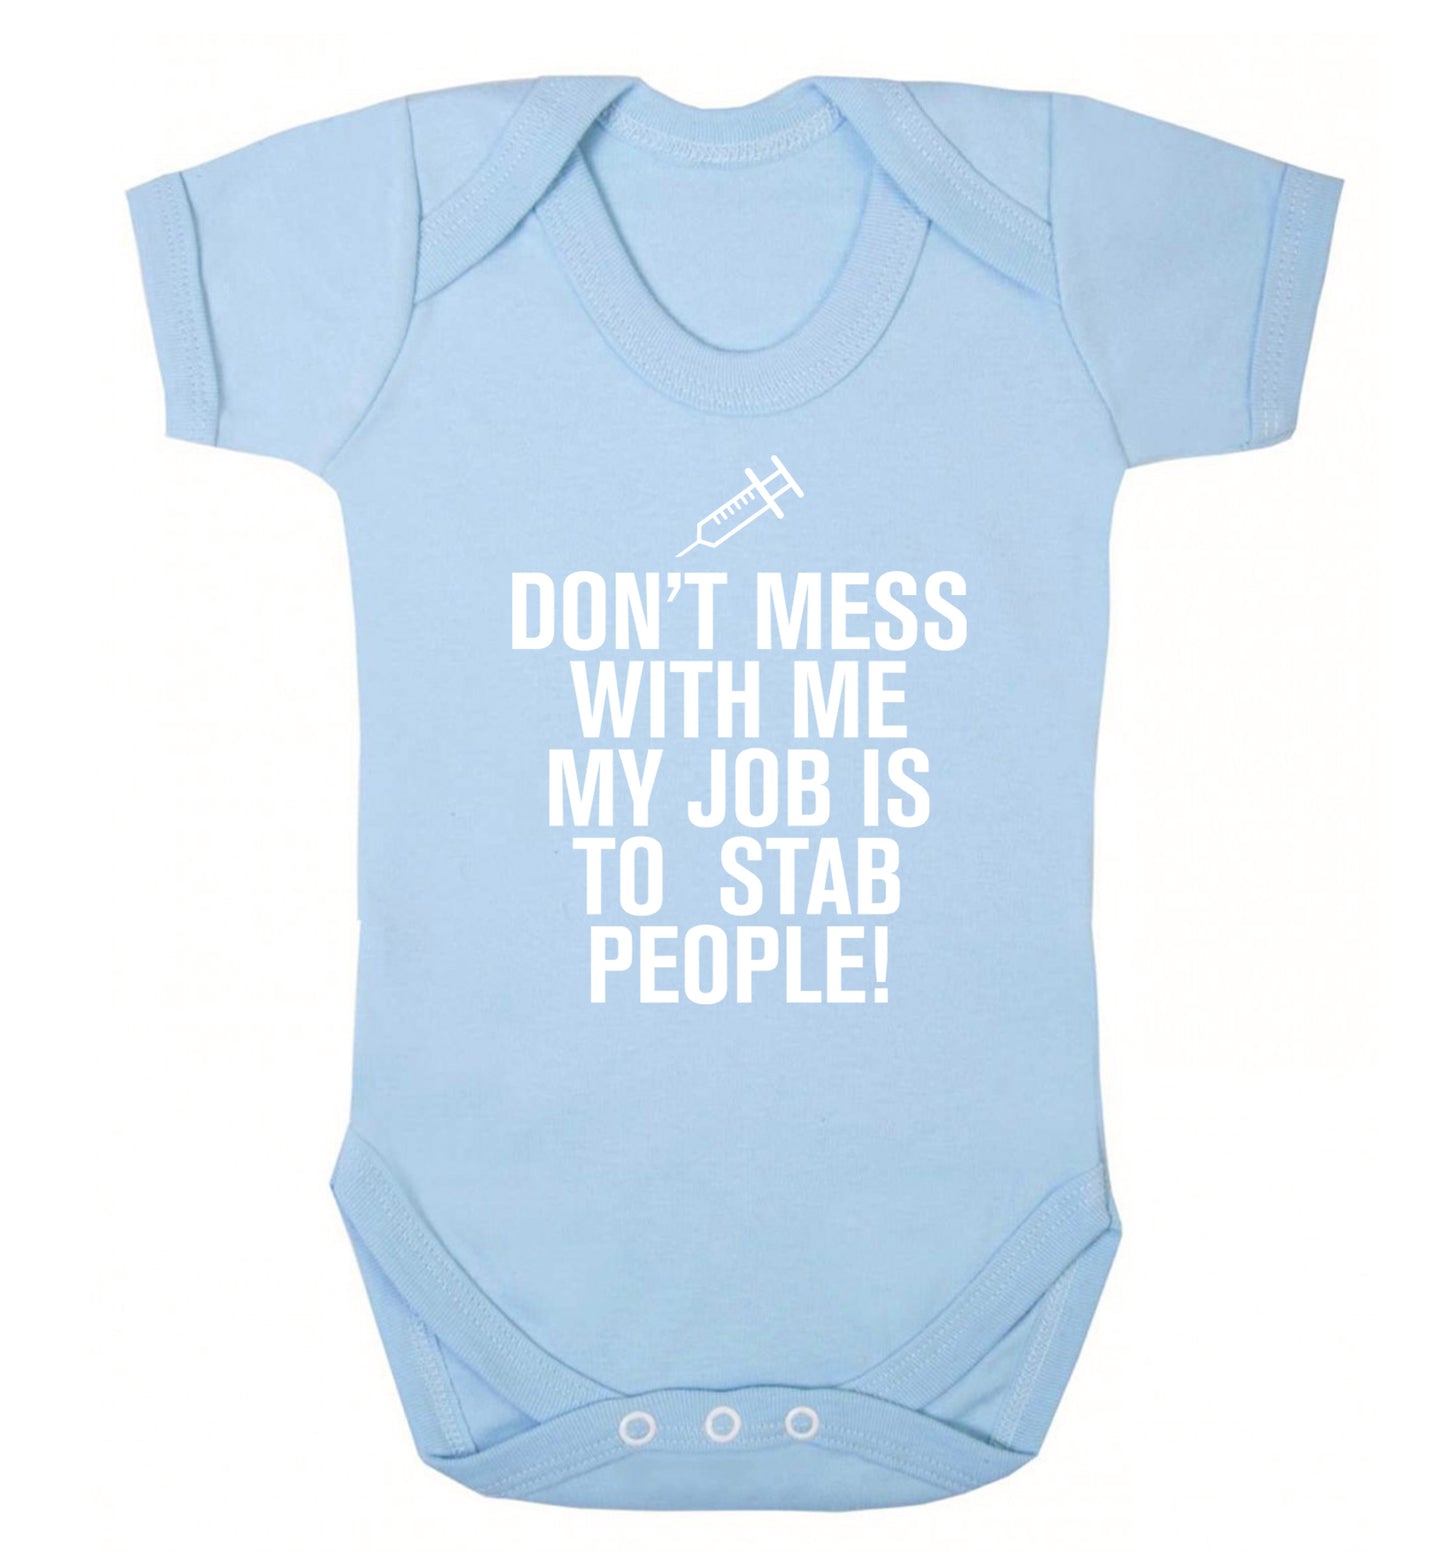 Don't mess with me my job is to stab people! Baby Vest pale blue 18-24 months